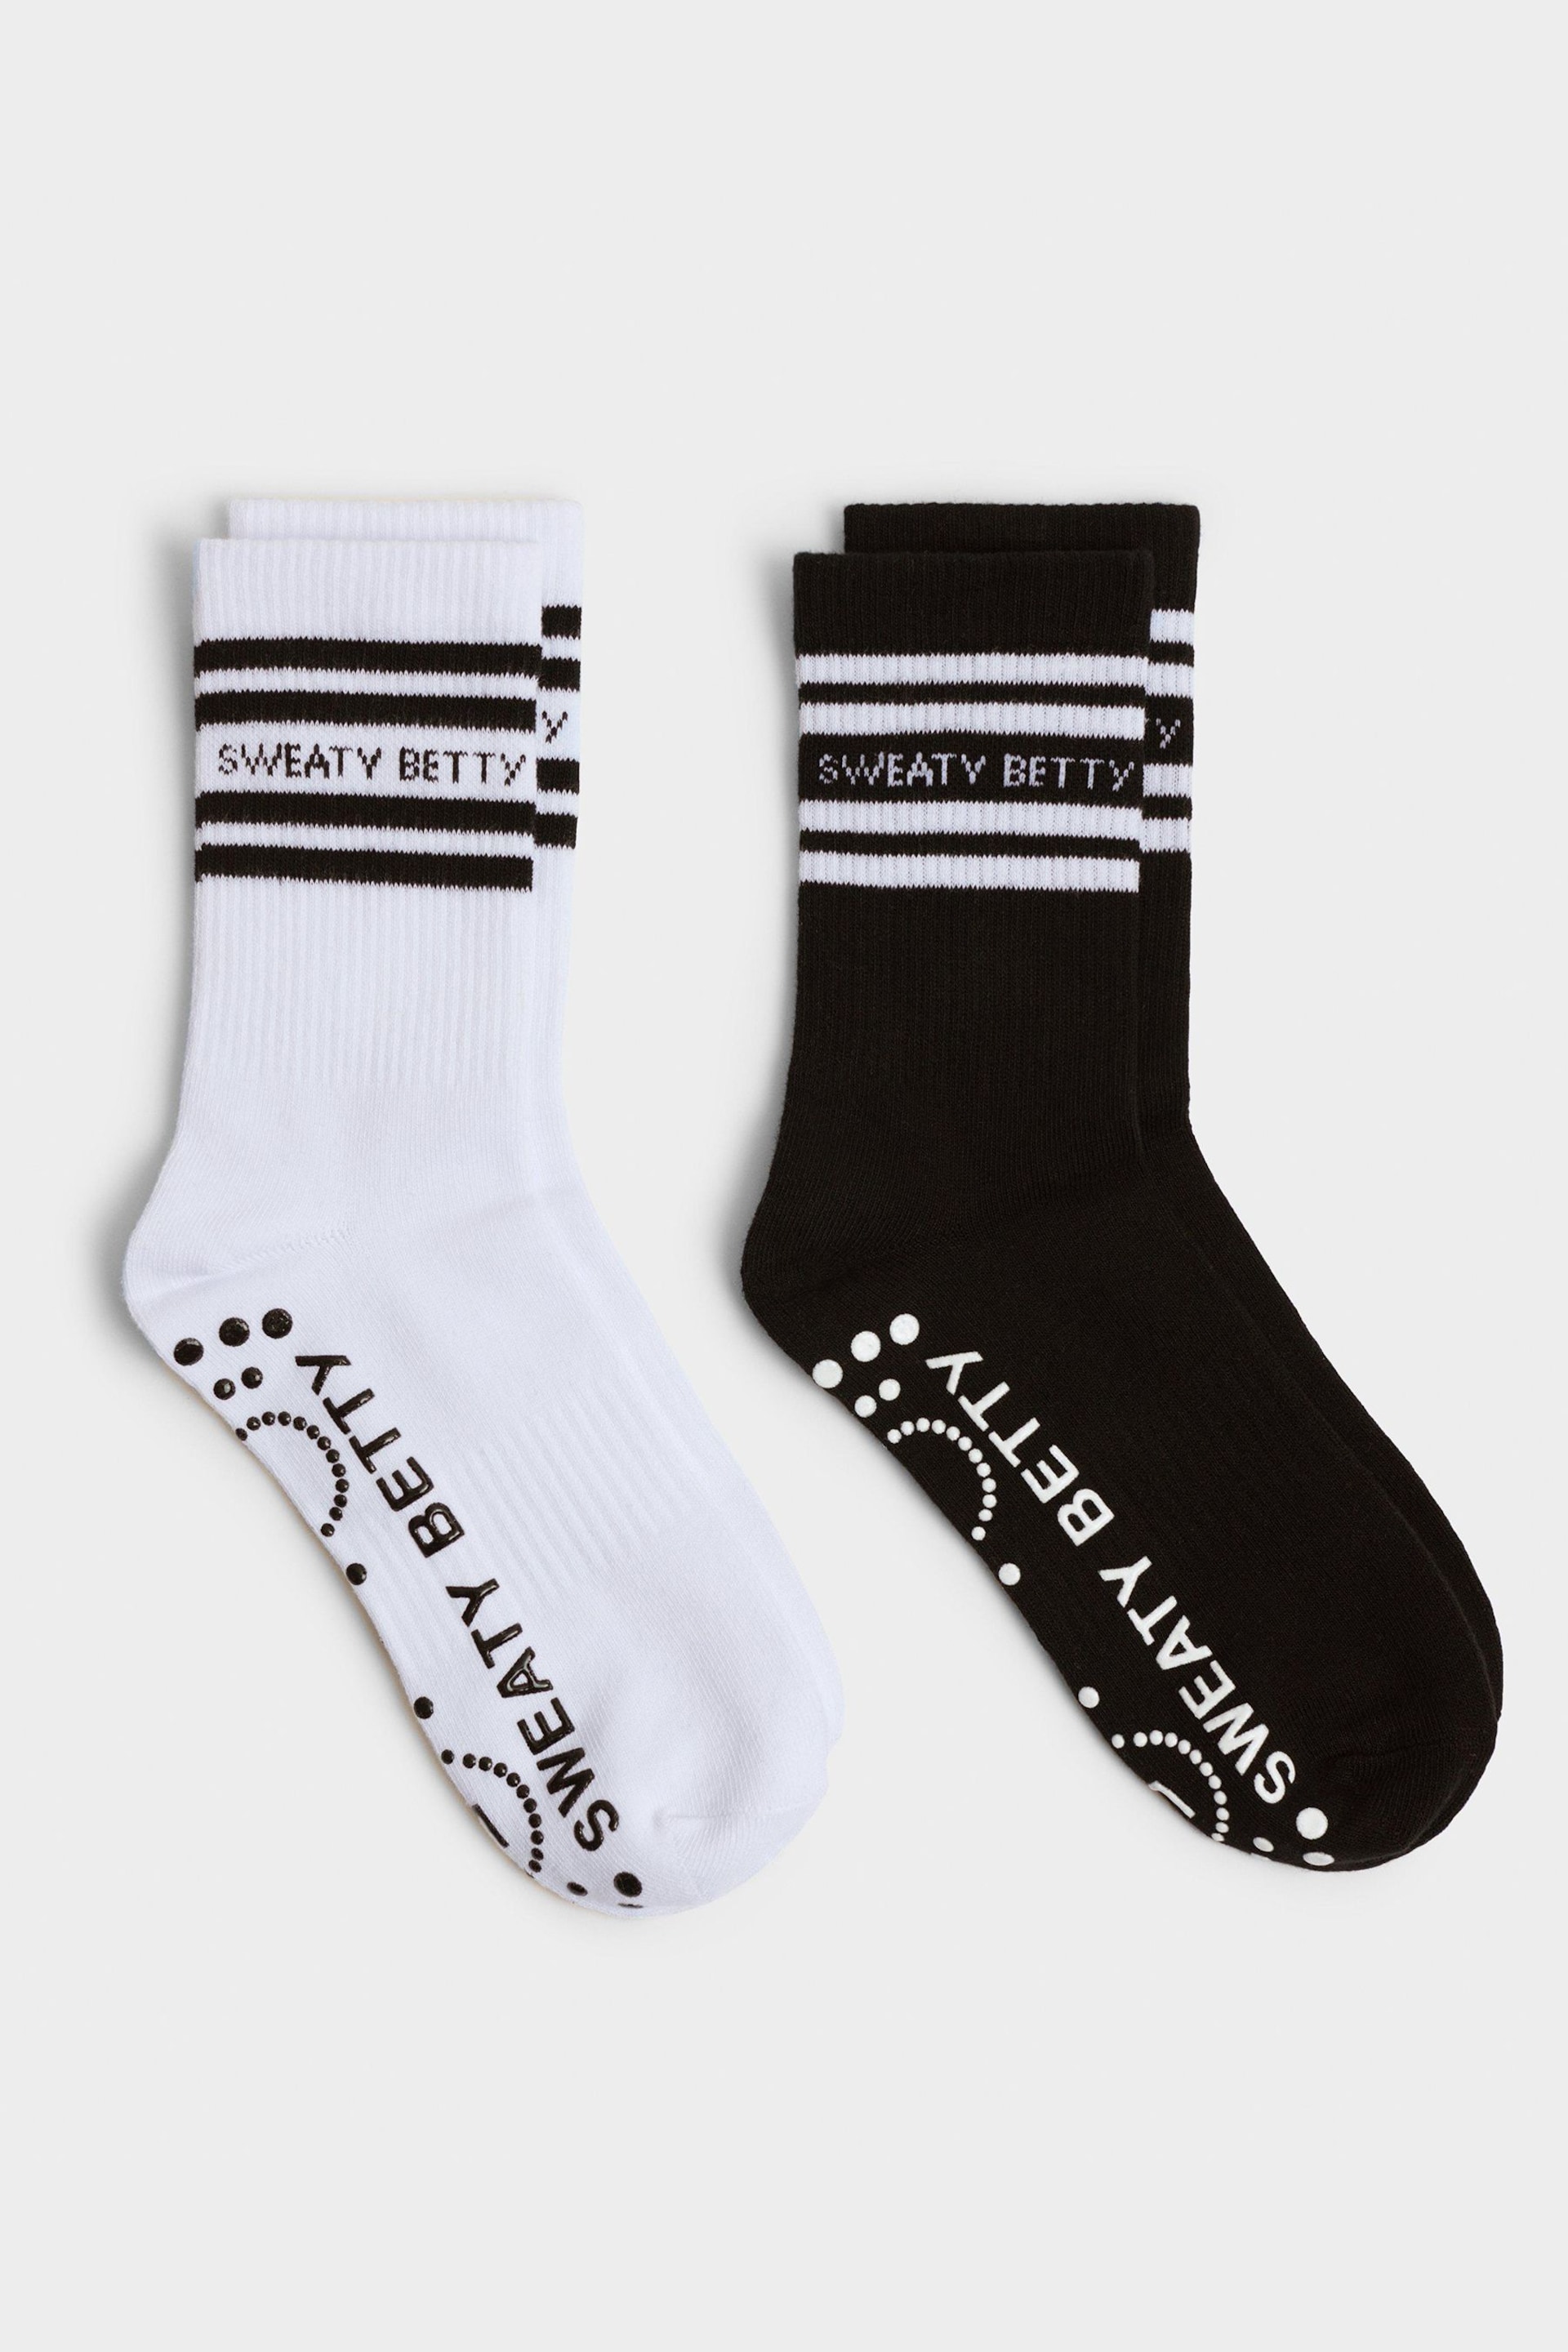 Sweaty Betty White Mid Length Ankle Gripper Socks 2 Pack - Image 1 of 3